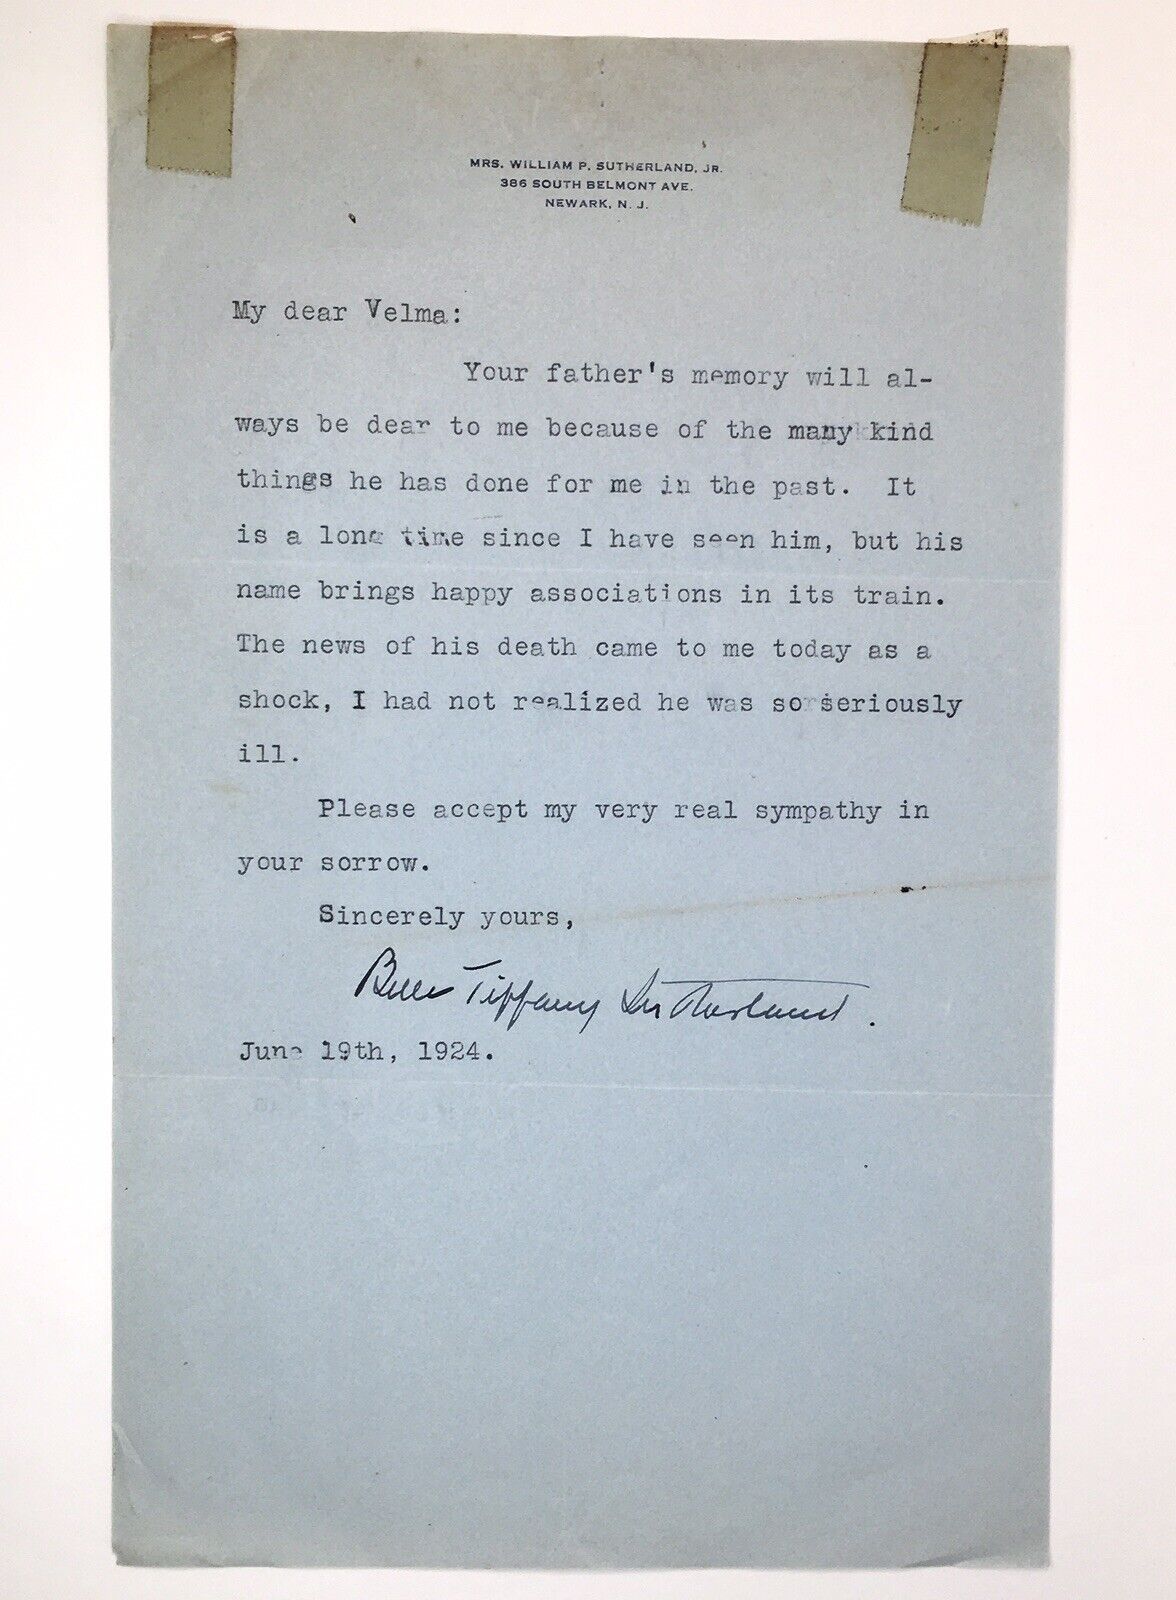 1924 Horace Swetland Condolence Letter to His Daughter Velma